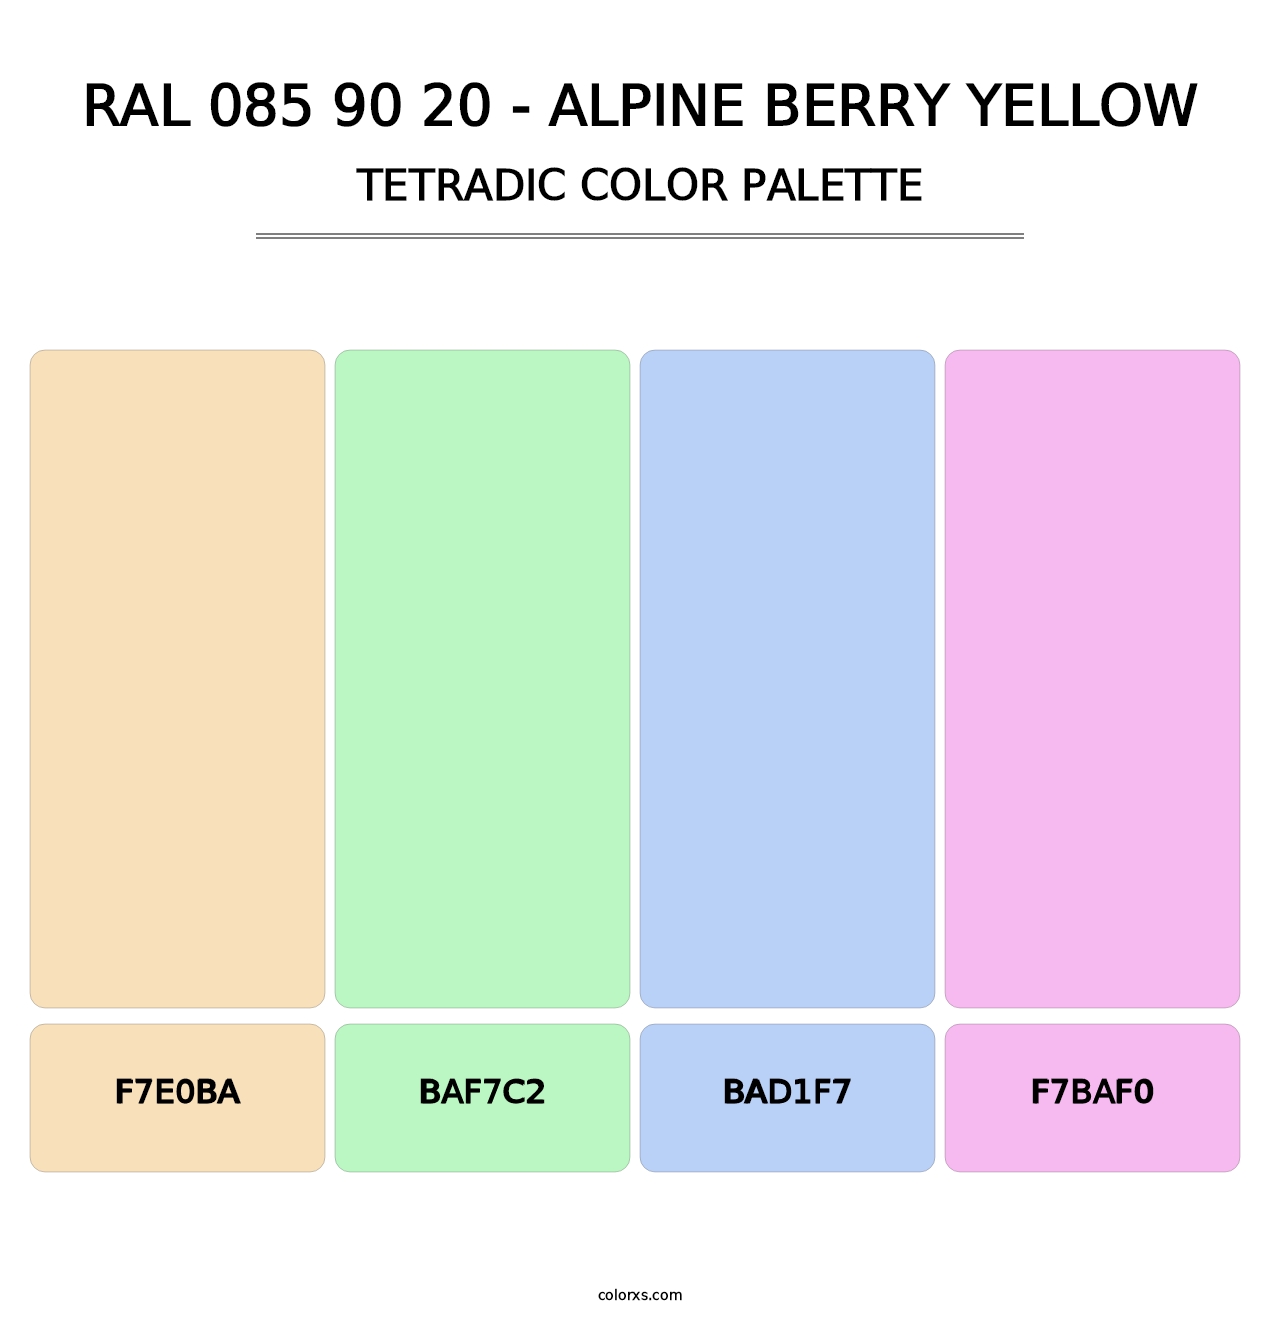 RAL 085 90 20 - Alpine Berry Yellow - Tetradic Color Palette